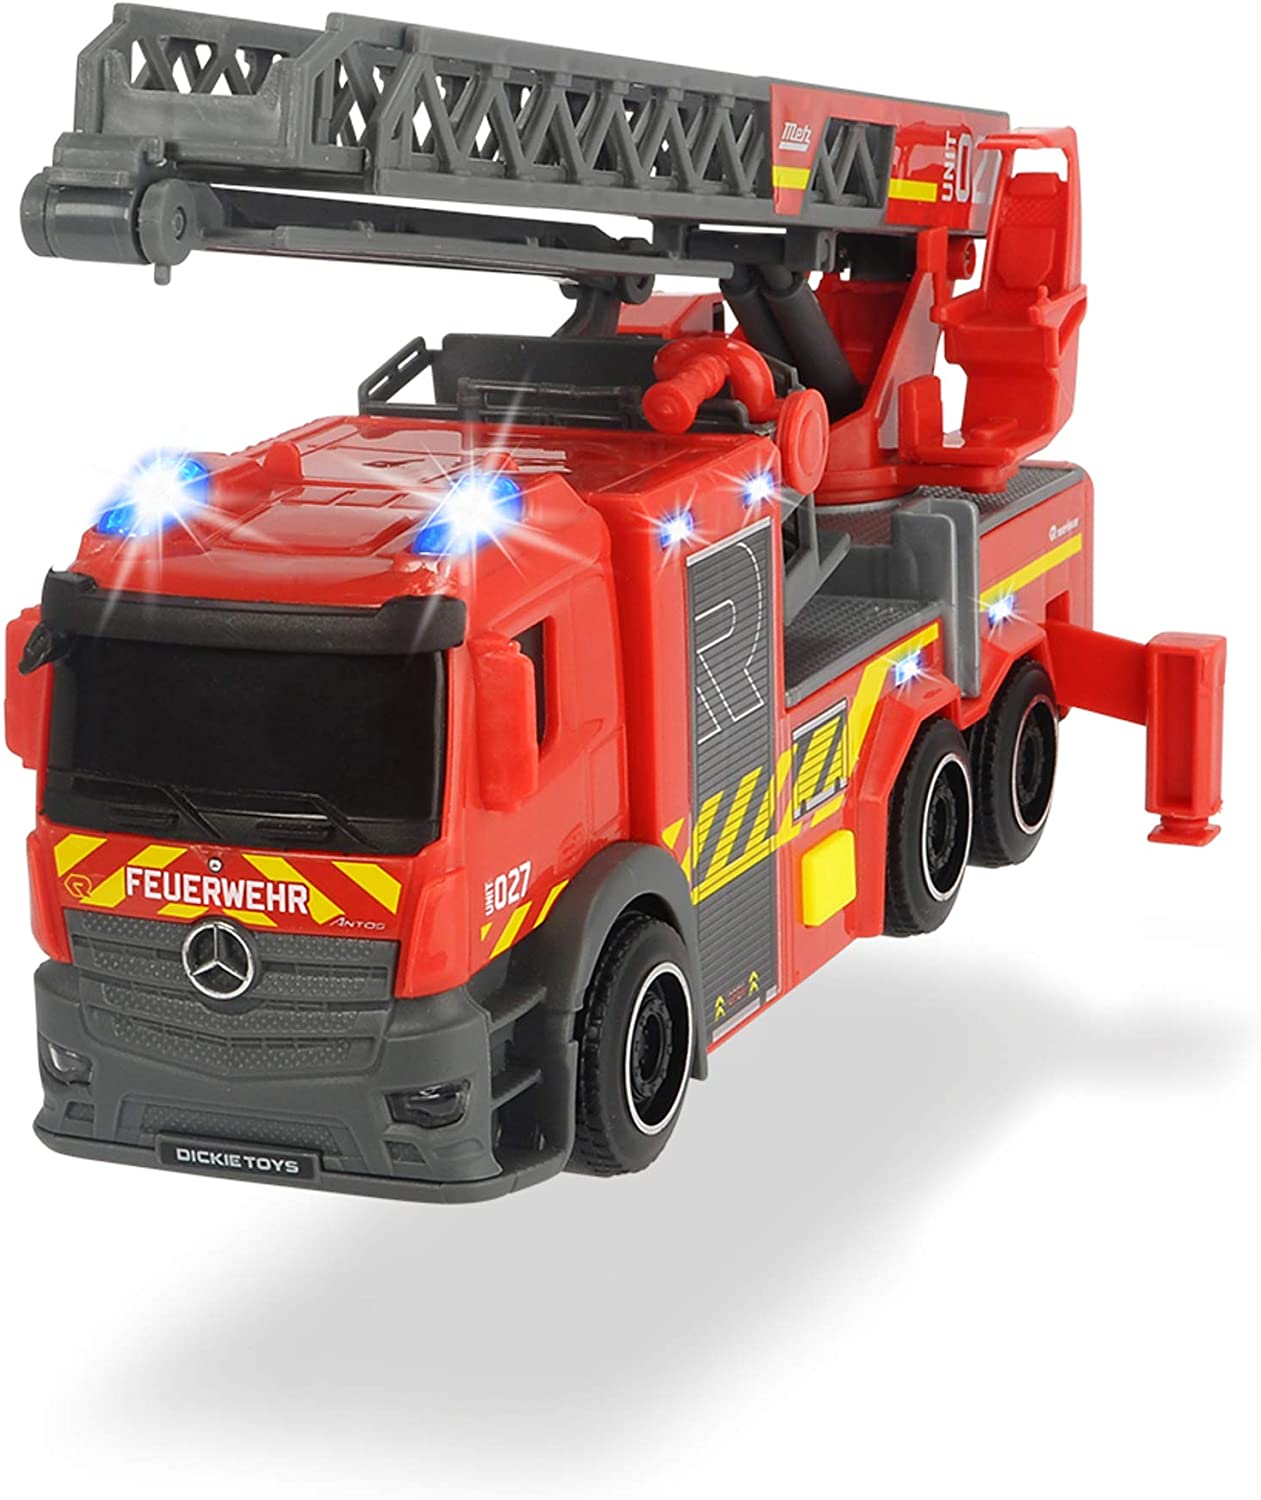 Dickie Toys 203714011 Fire Engine With Rotating Ladder, Rosenbauer Fire Bri